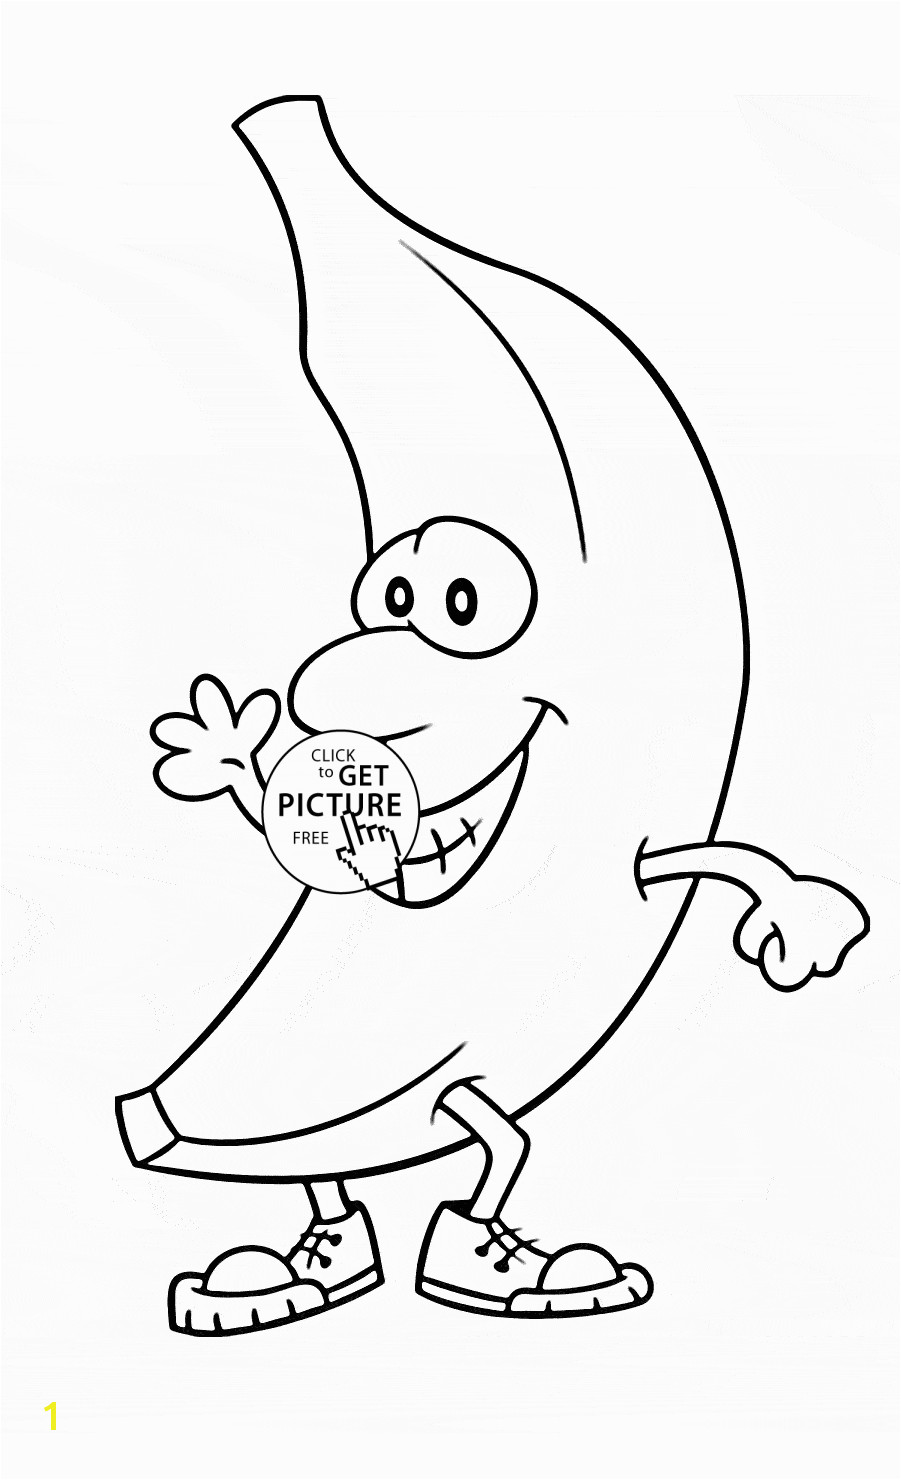 Funny Cartoon Banana fruit coloring page for kids fruits coloring pages printables free Wuppsy